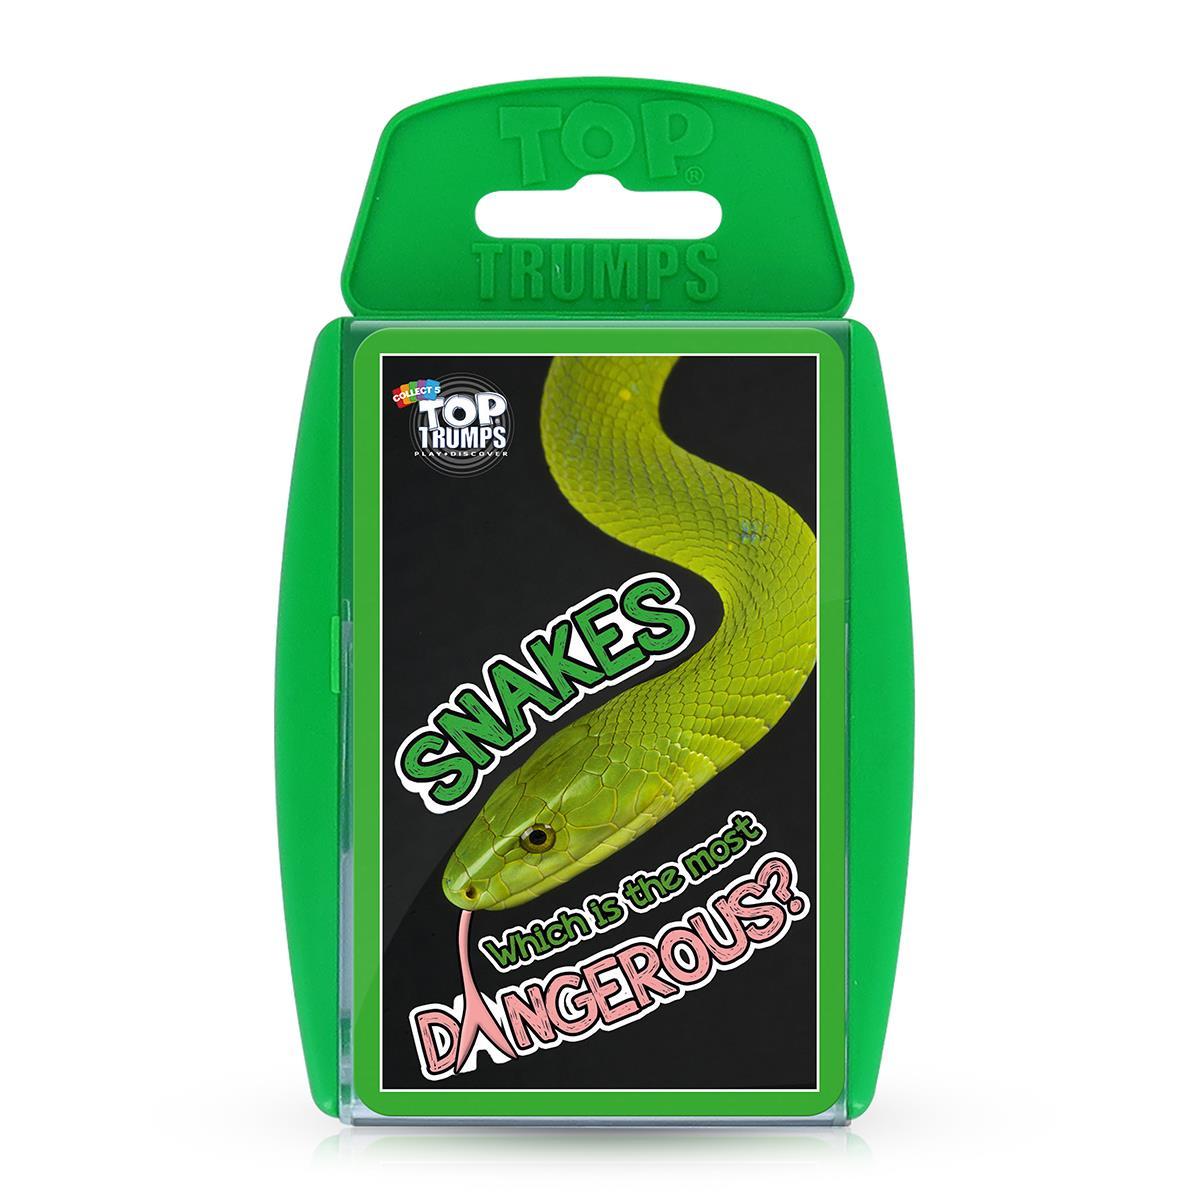 SNAKES CARD GAME